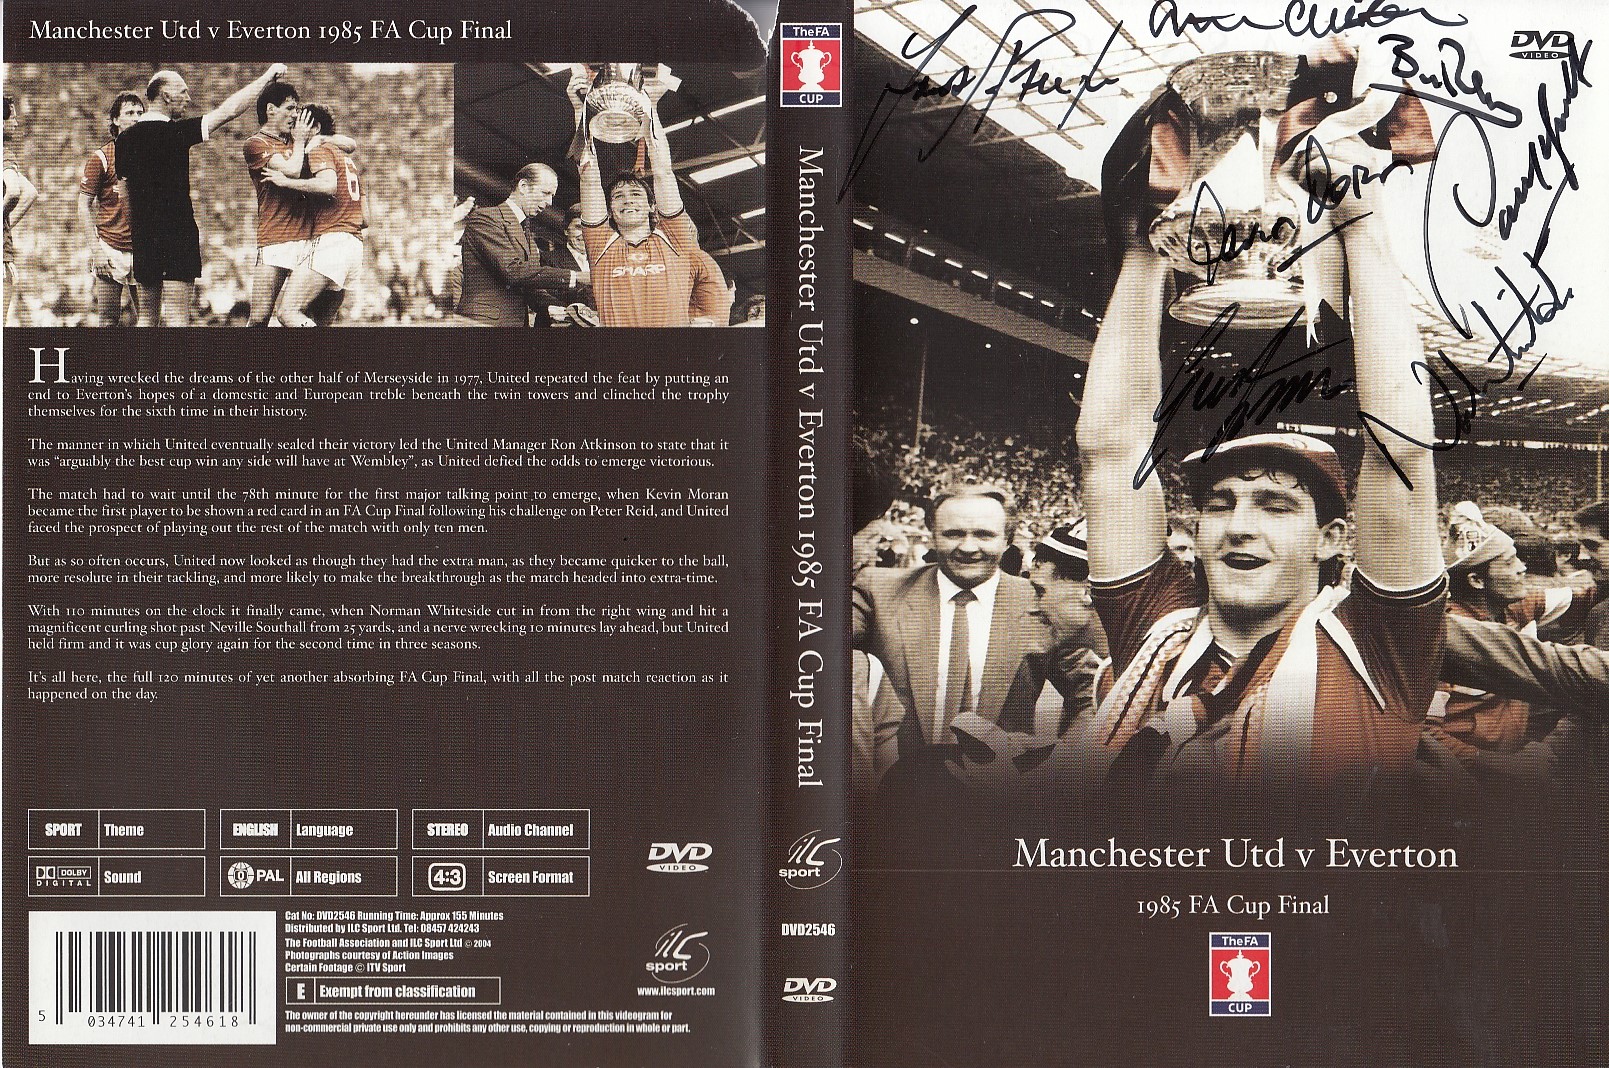 Autographed DVD 1985 FA CUP FINAL : New and unwatched DVD depicting the 1985 FA Cup Final, Everton v